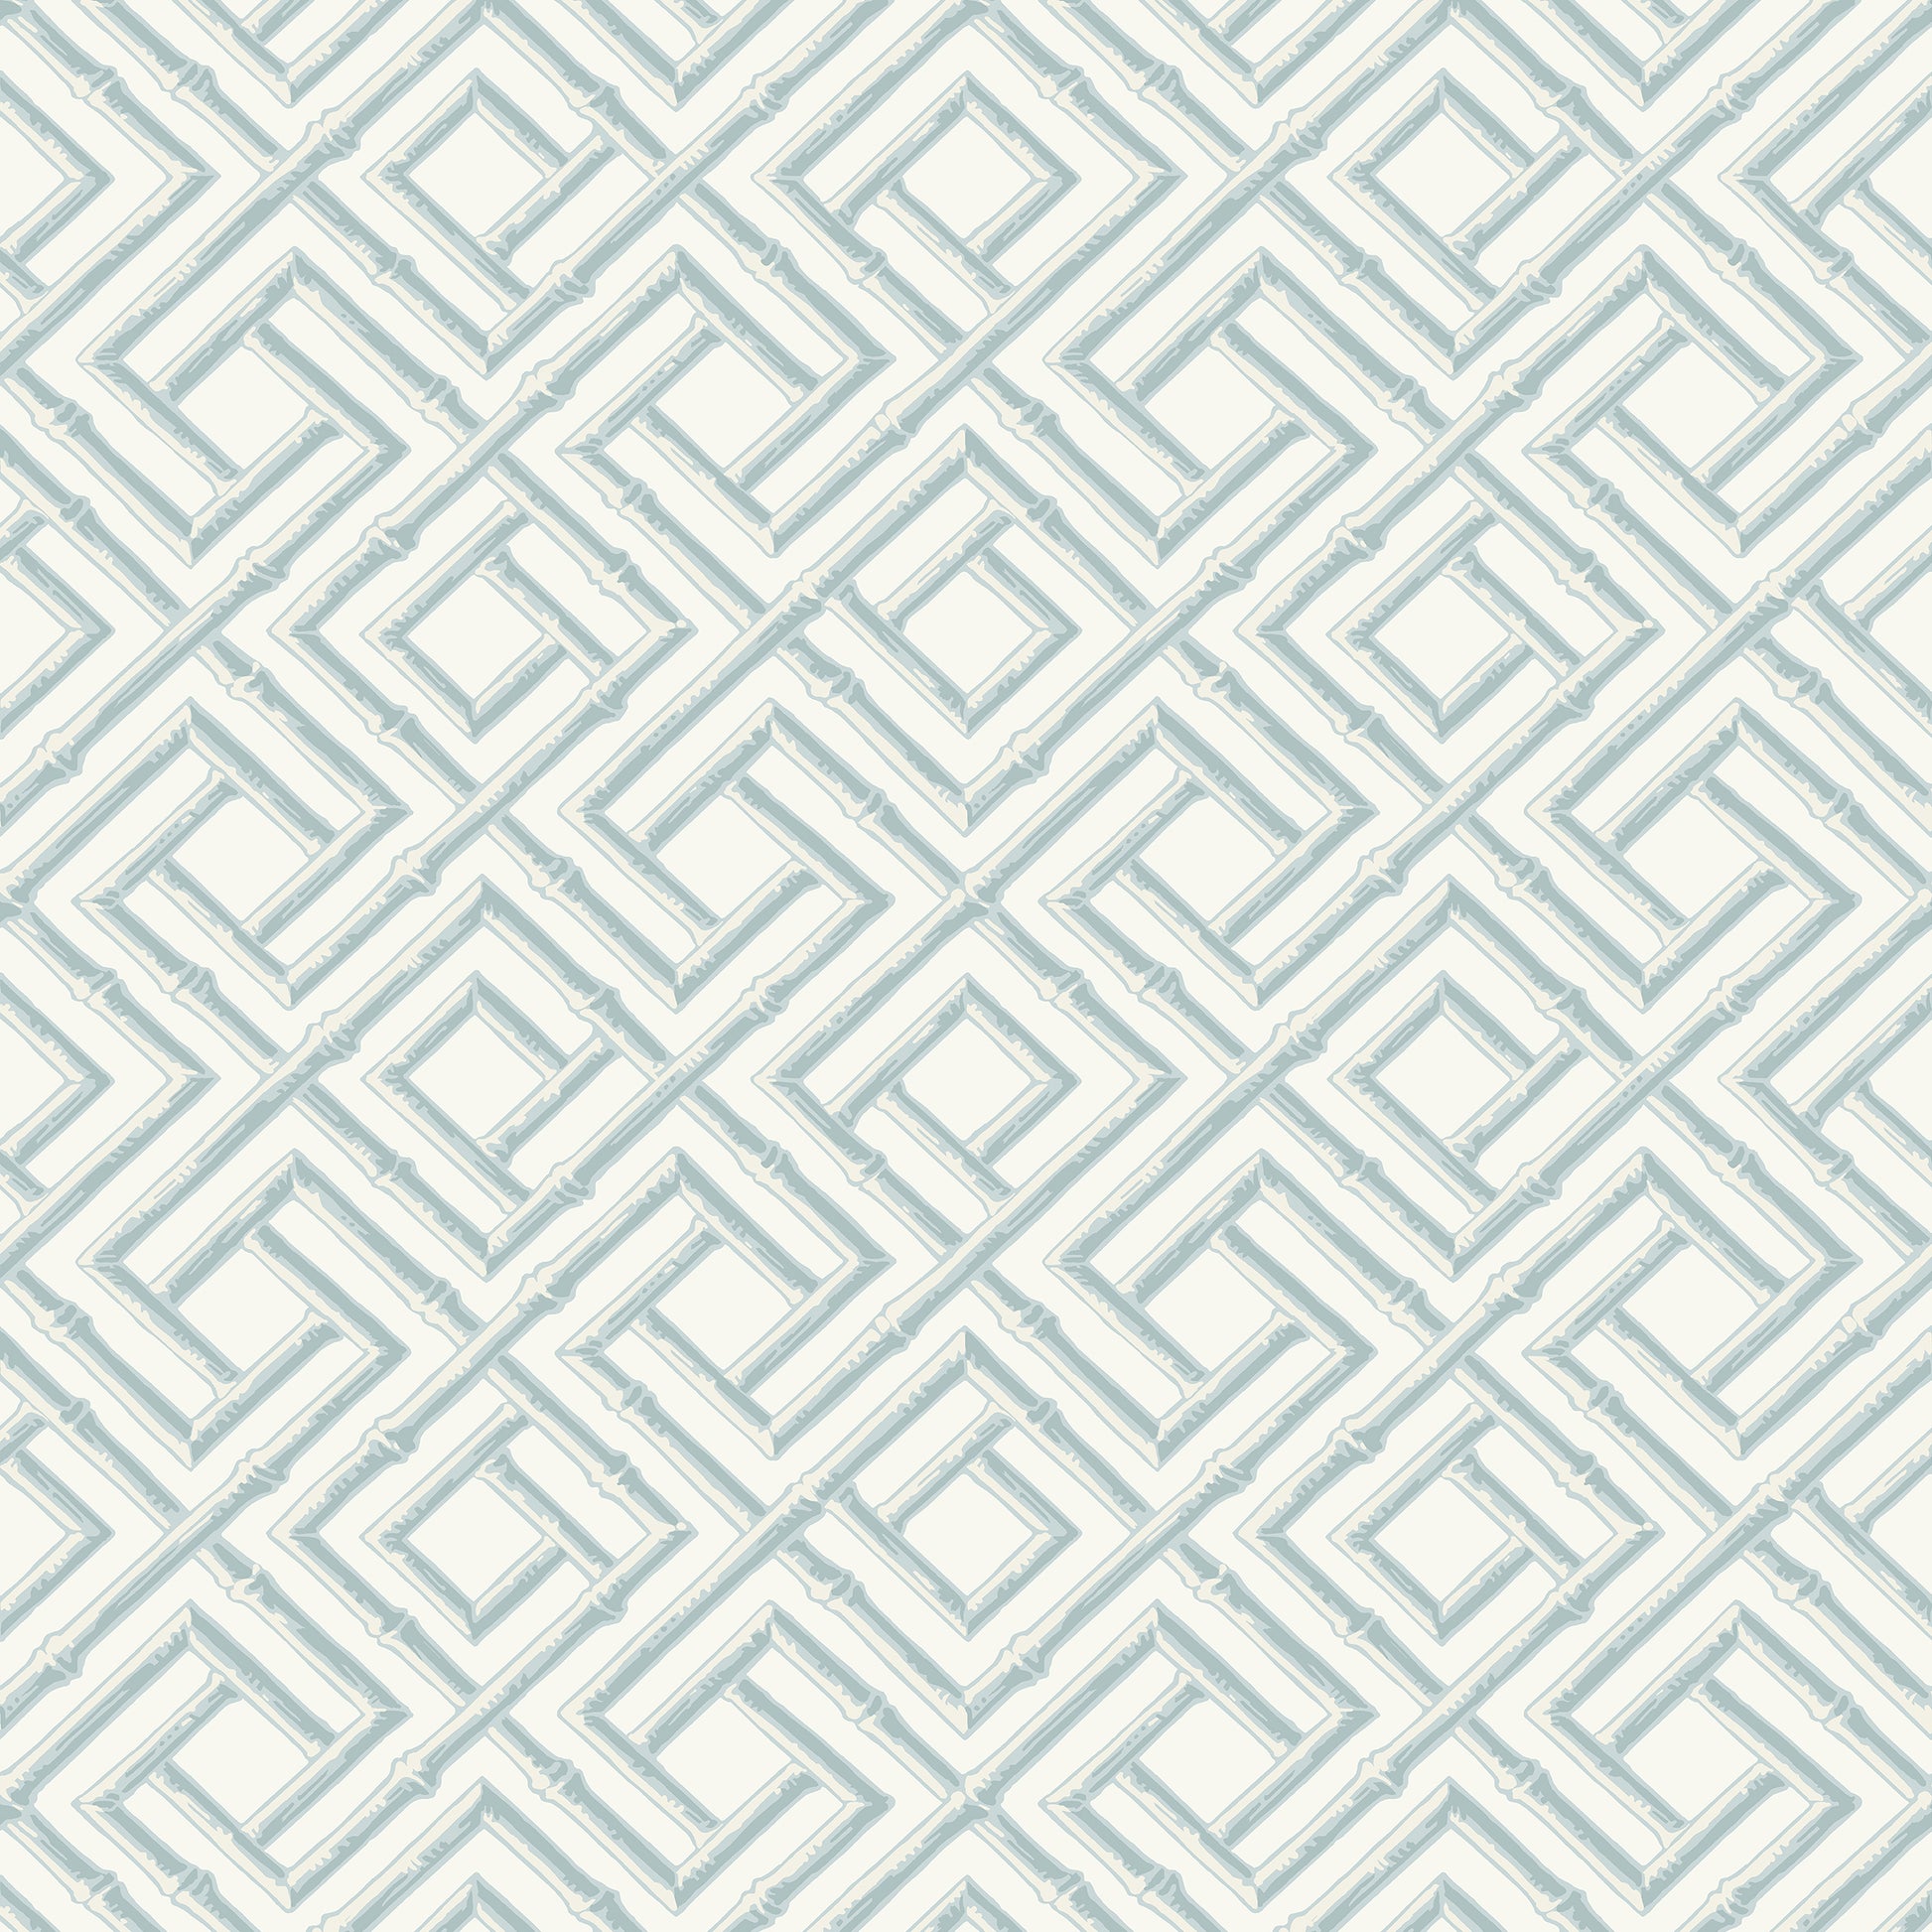 Purchase Thibaut Wallpaper Product# T42050 pattern name French Lattice color Spa Blue. 